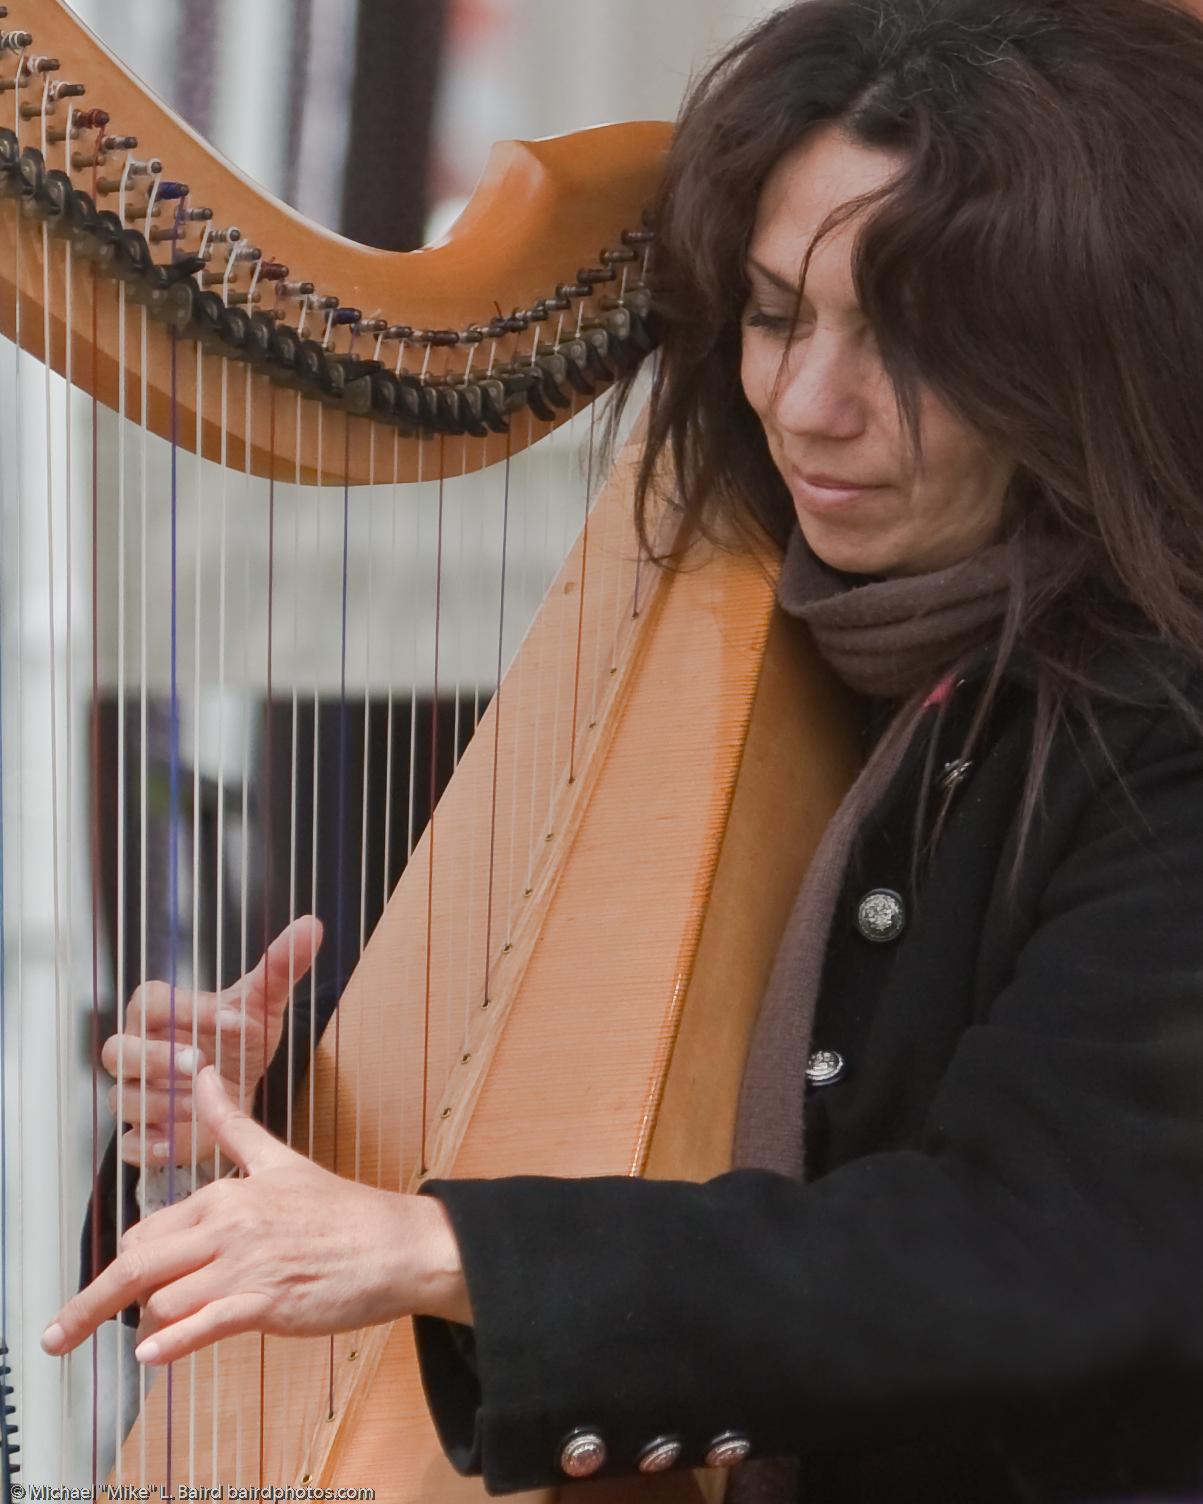 a woman holding a long harp and wearing a scarf